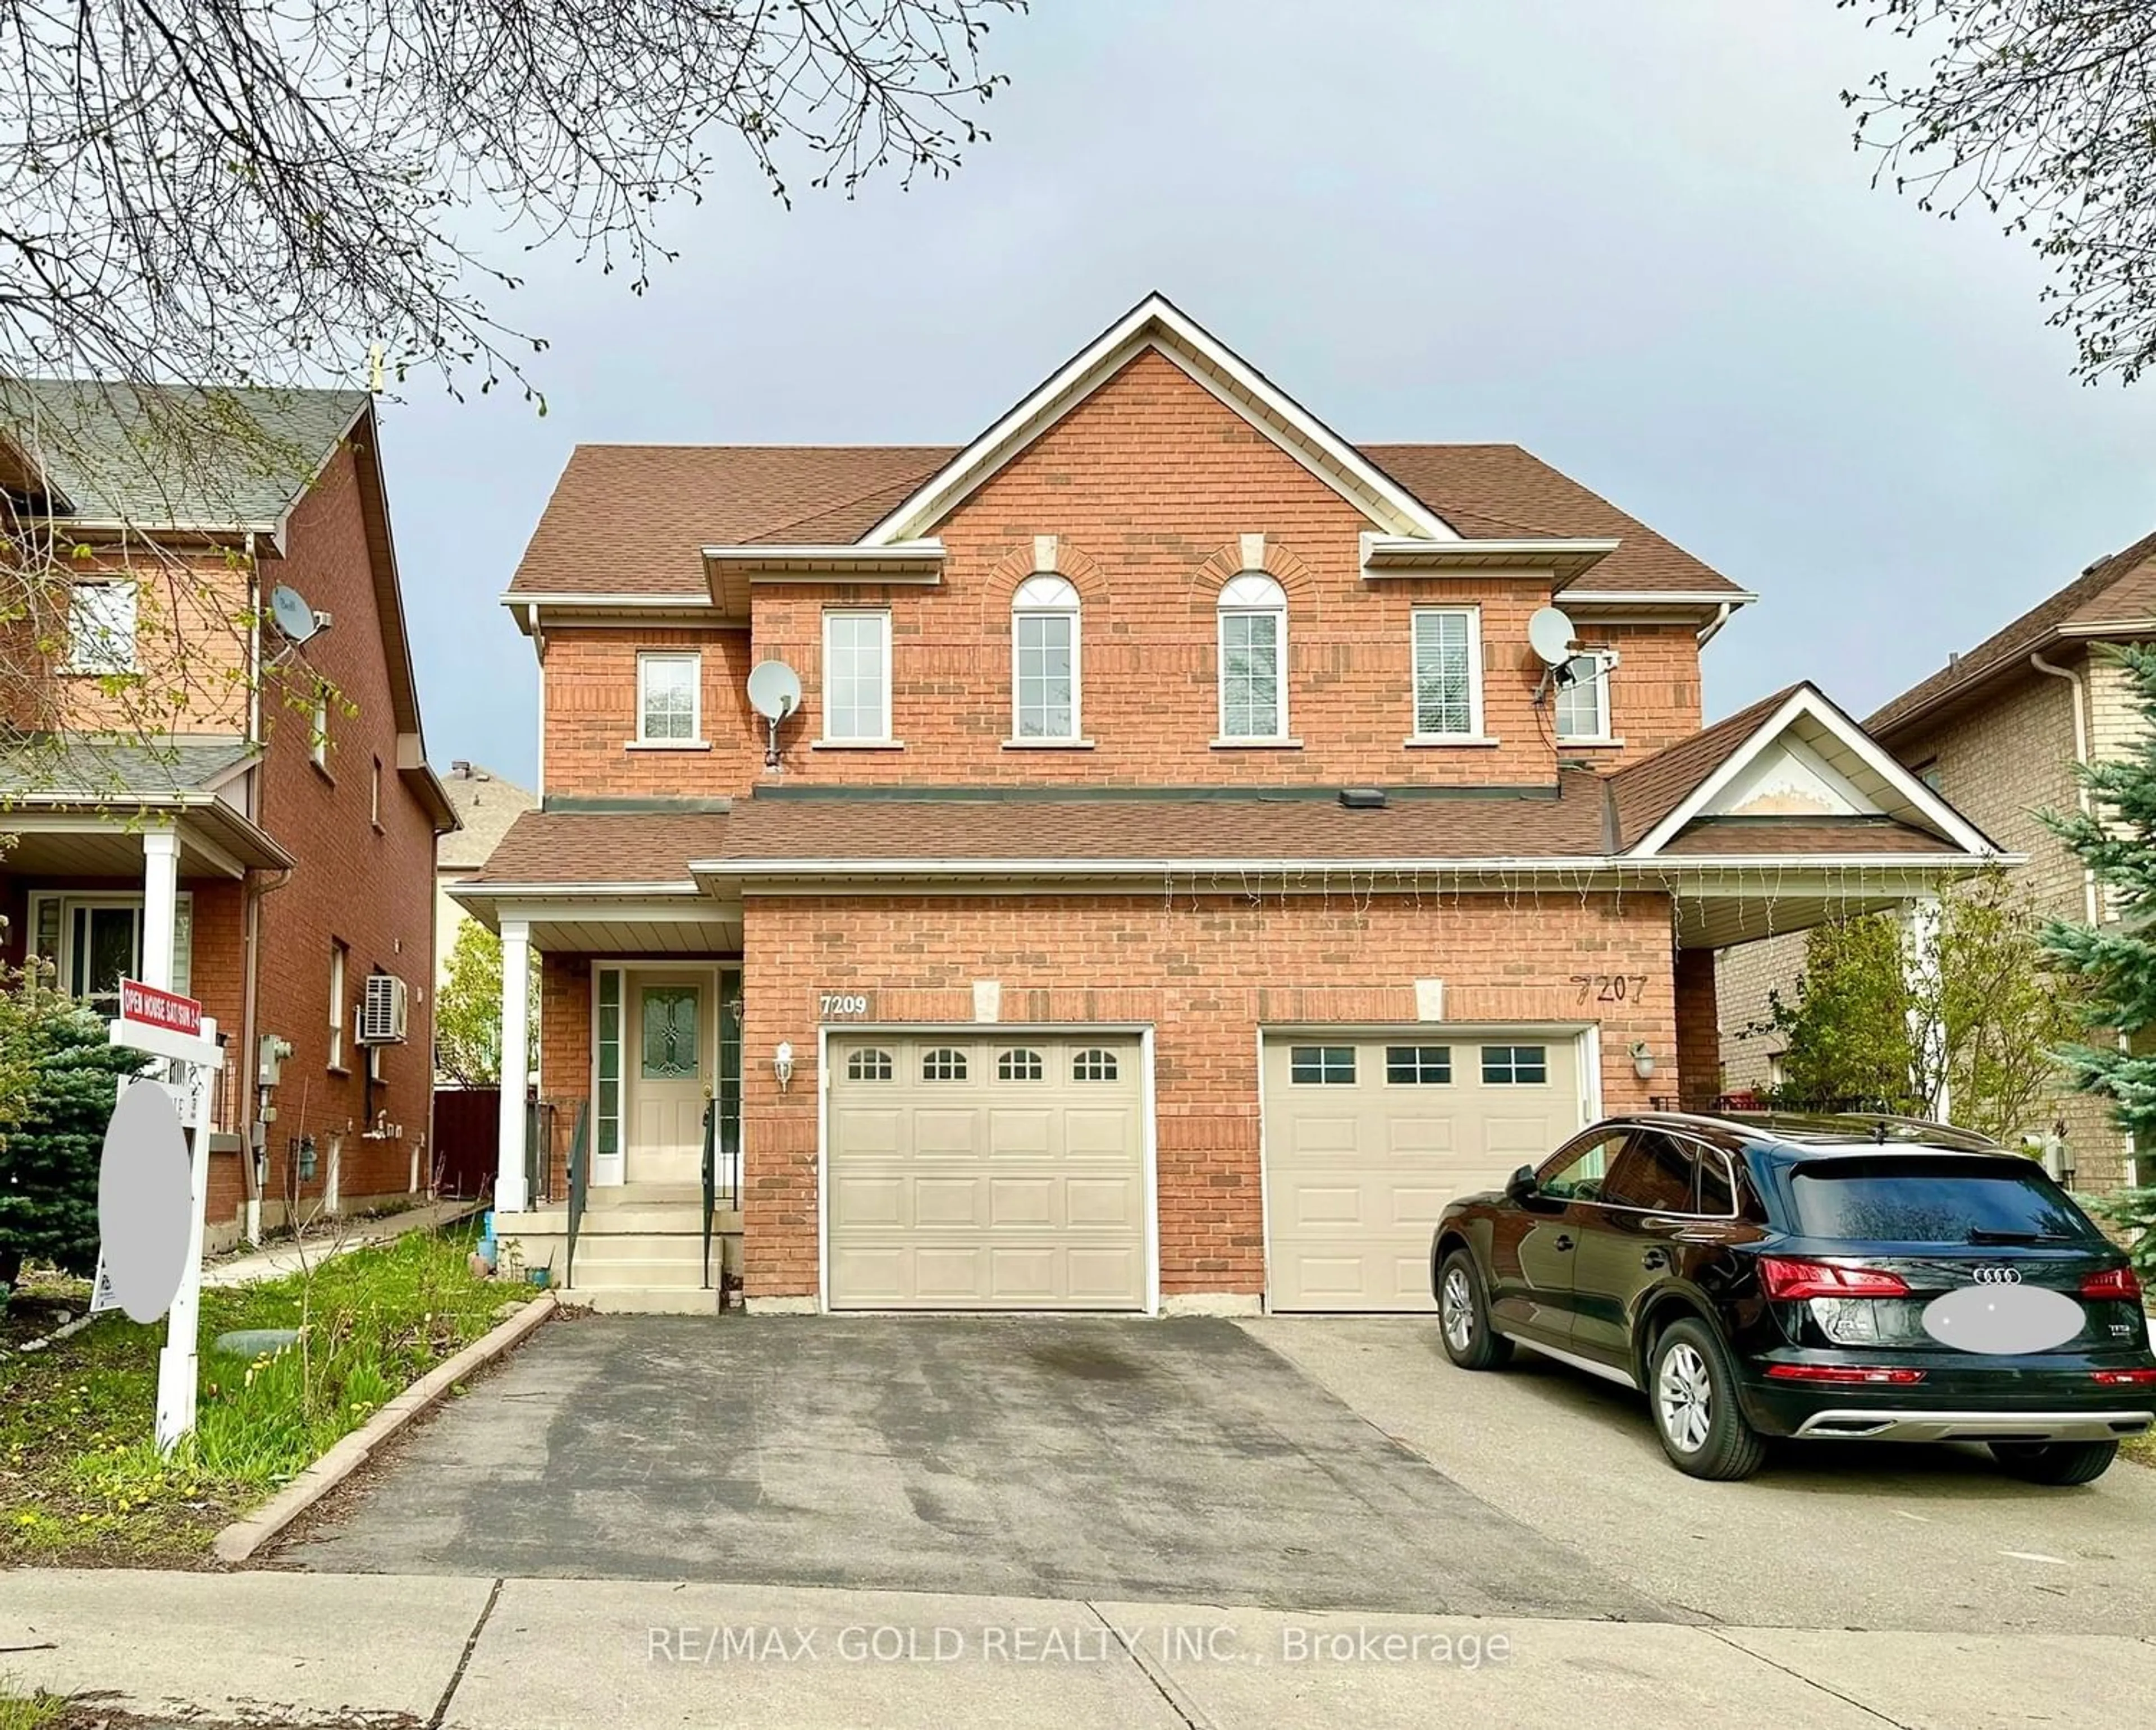 Home with brick exterior material for 7209 Aztec Hill, Mississauga Ontario L5W 1K2